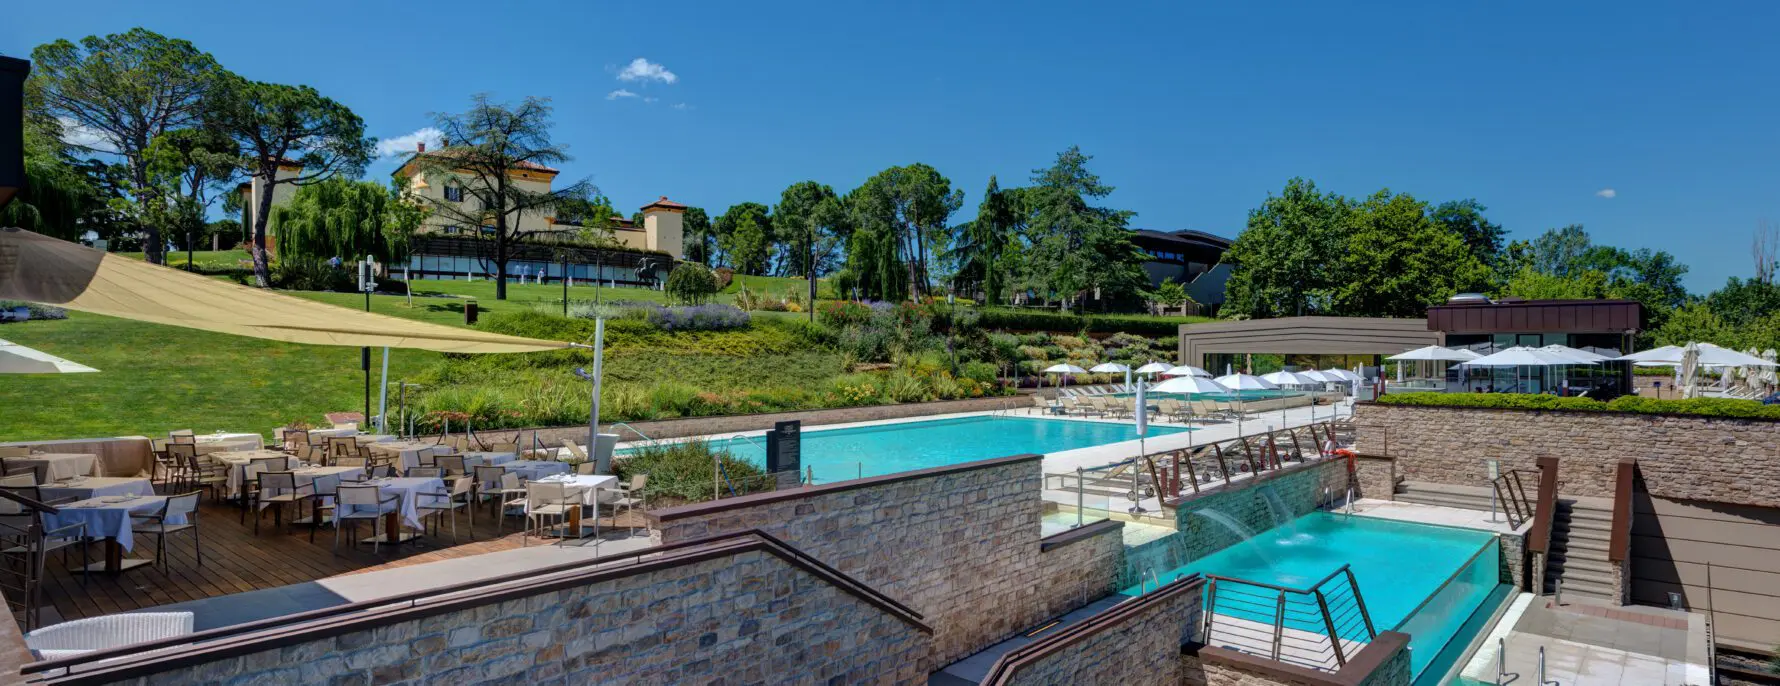 Nest Italy: Resort & SPA in the Bolognese Hills